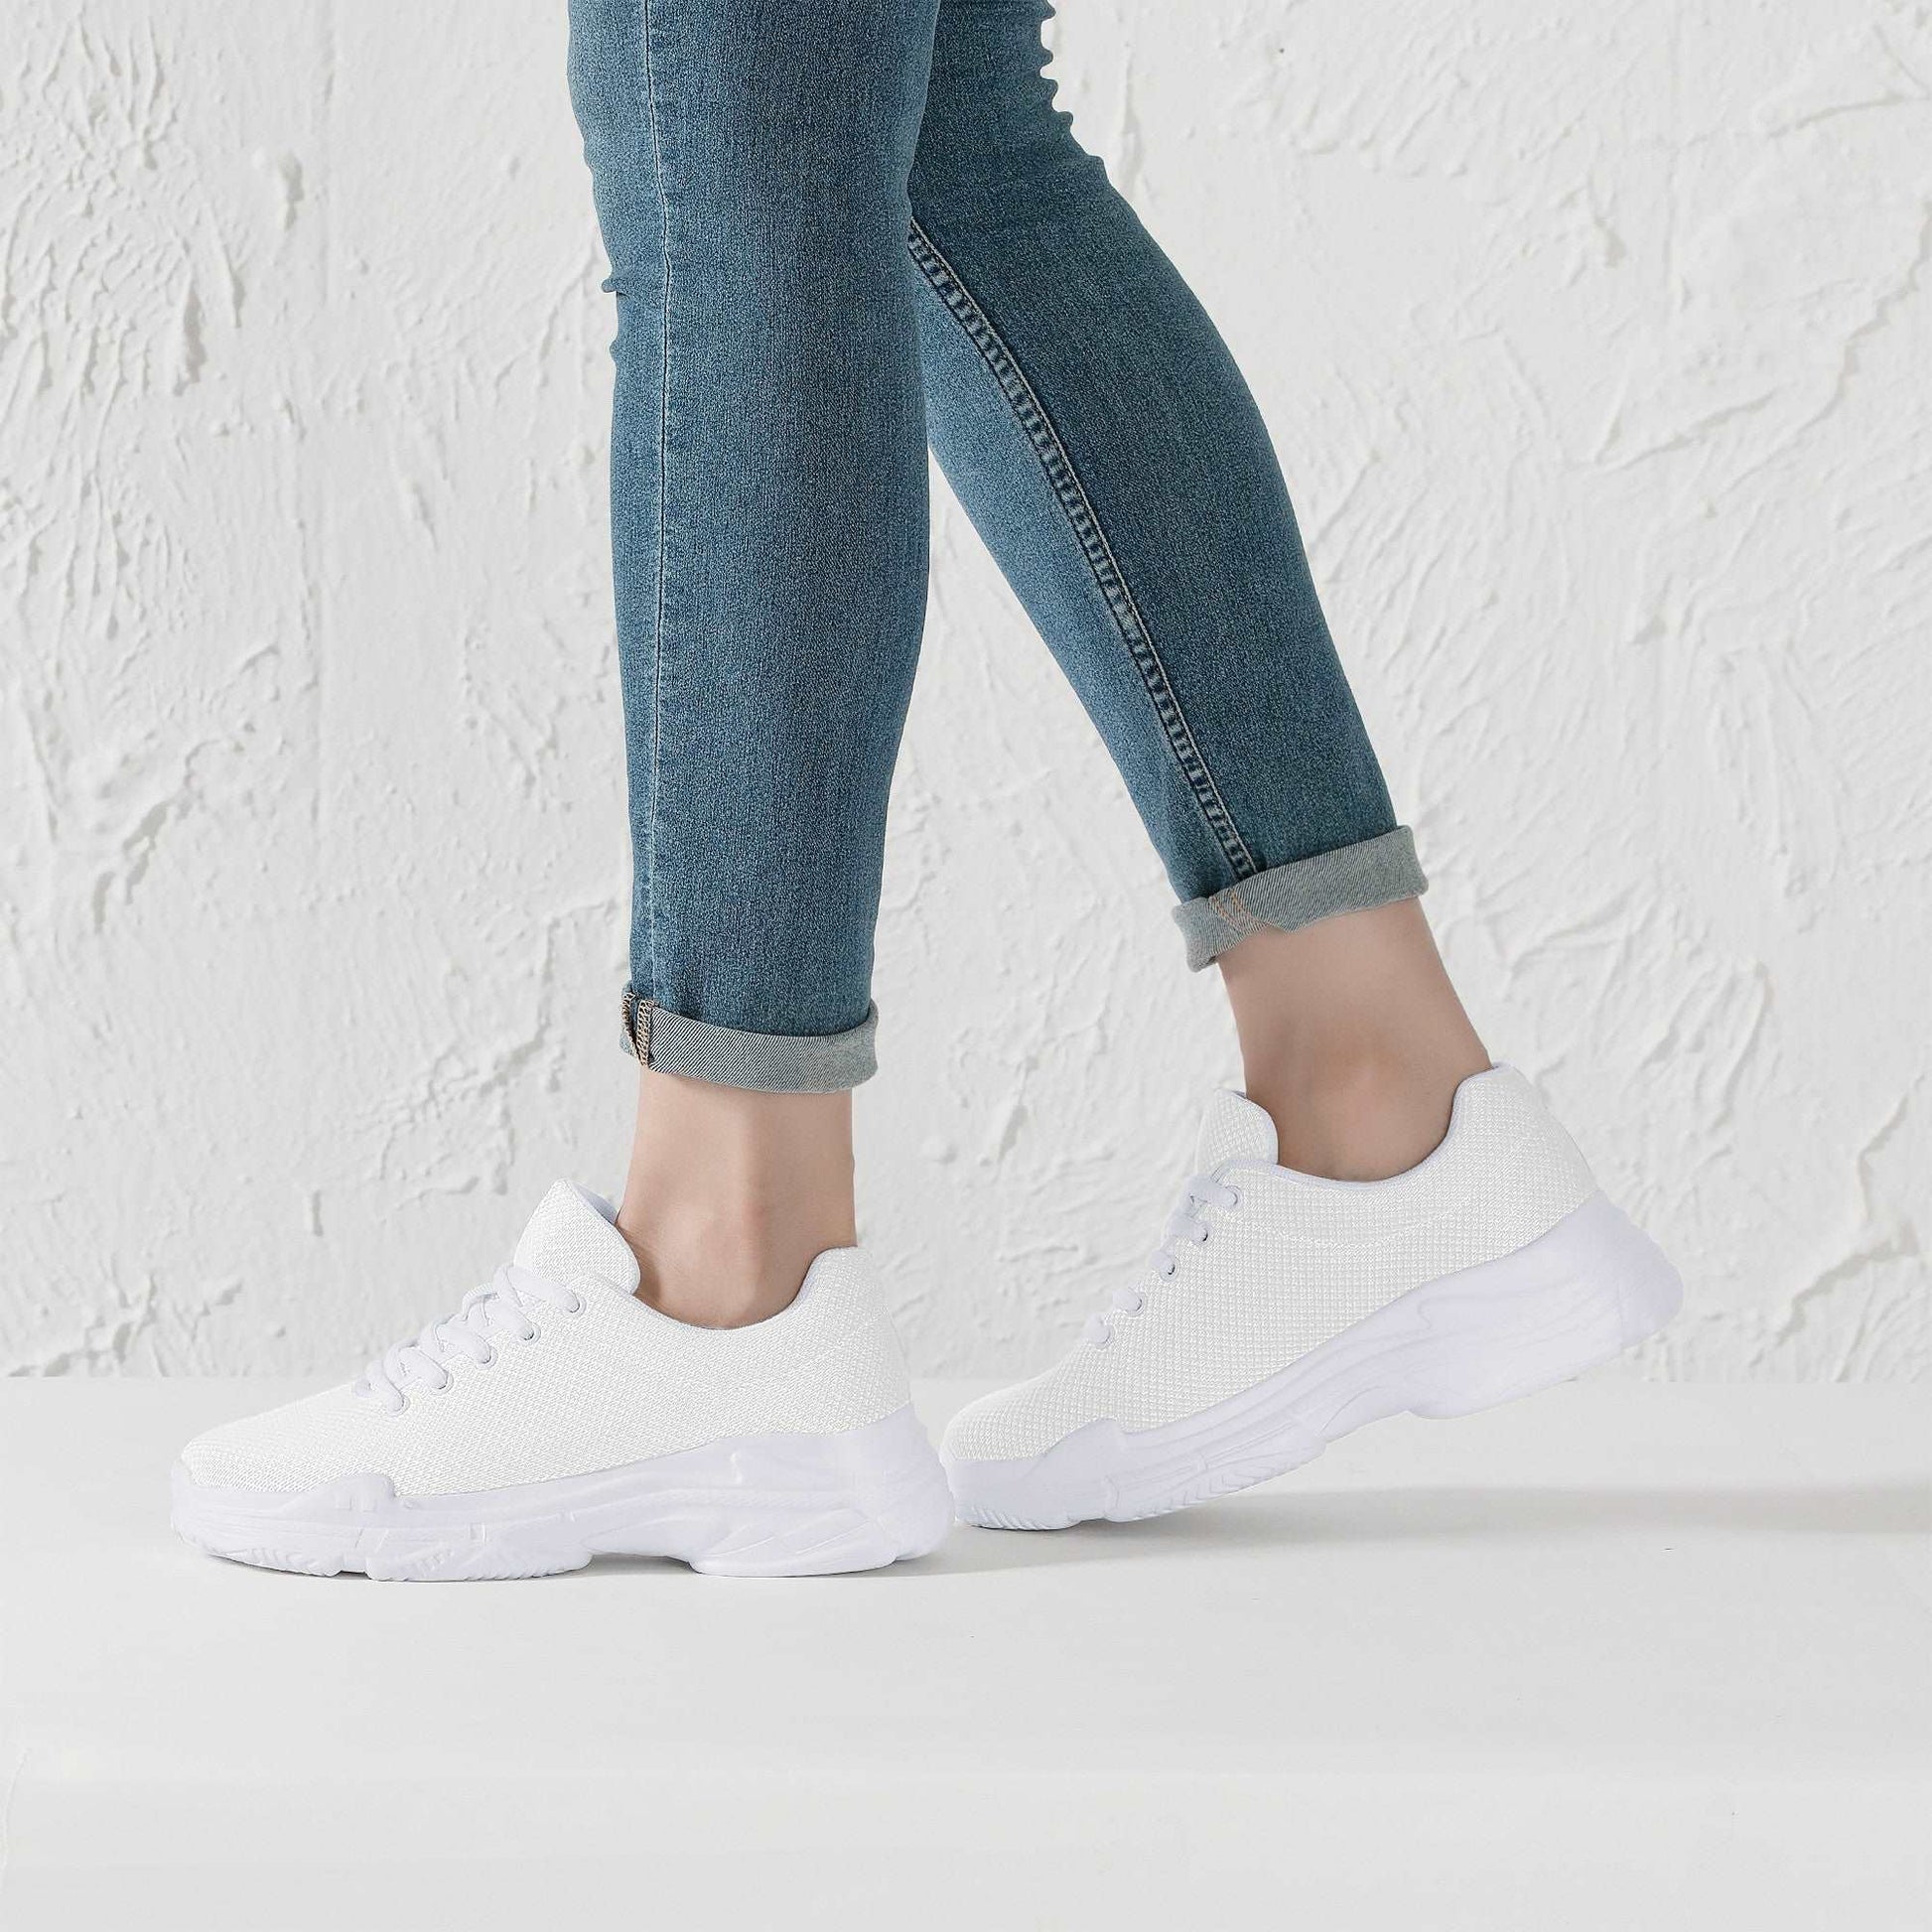 Create Your Own - Chunky Sneakers - White - HayGoodies